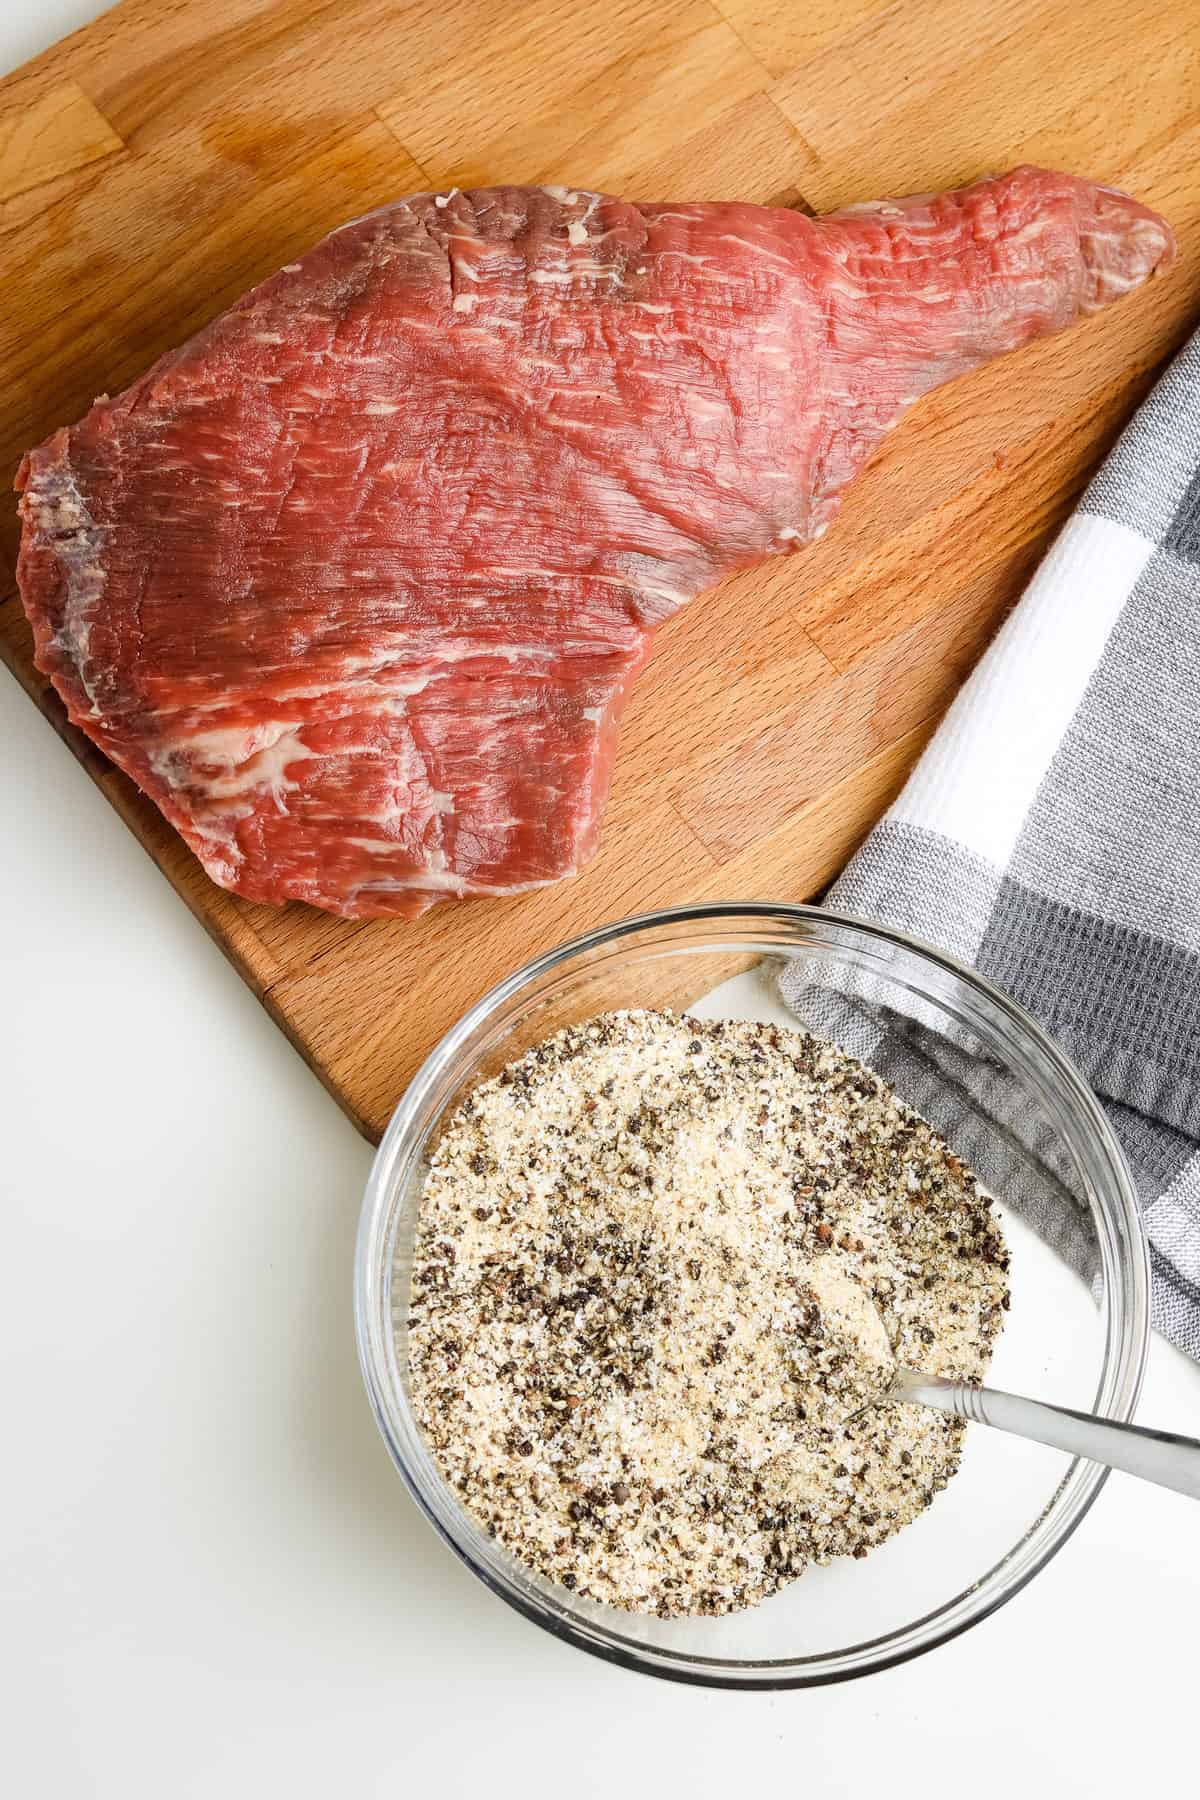 Tri tip on cutting board with seasonings mixed in bowl